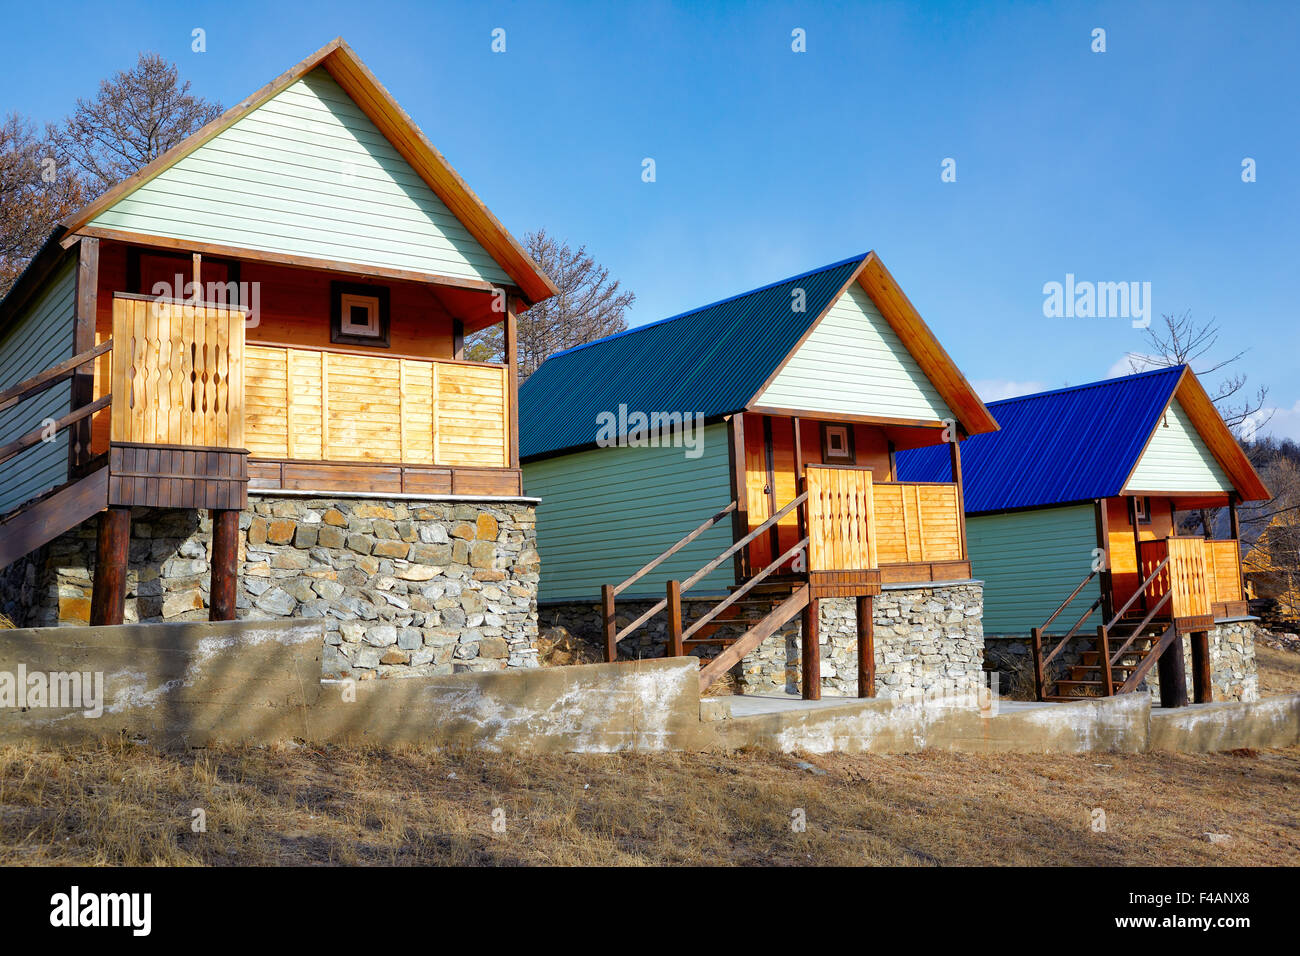 Wooden bungalows Stock Photo